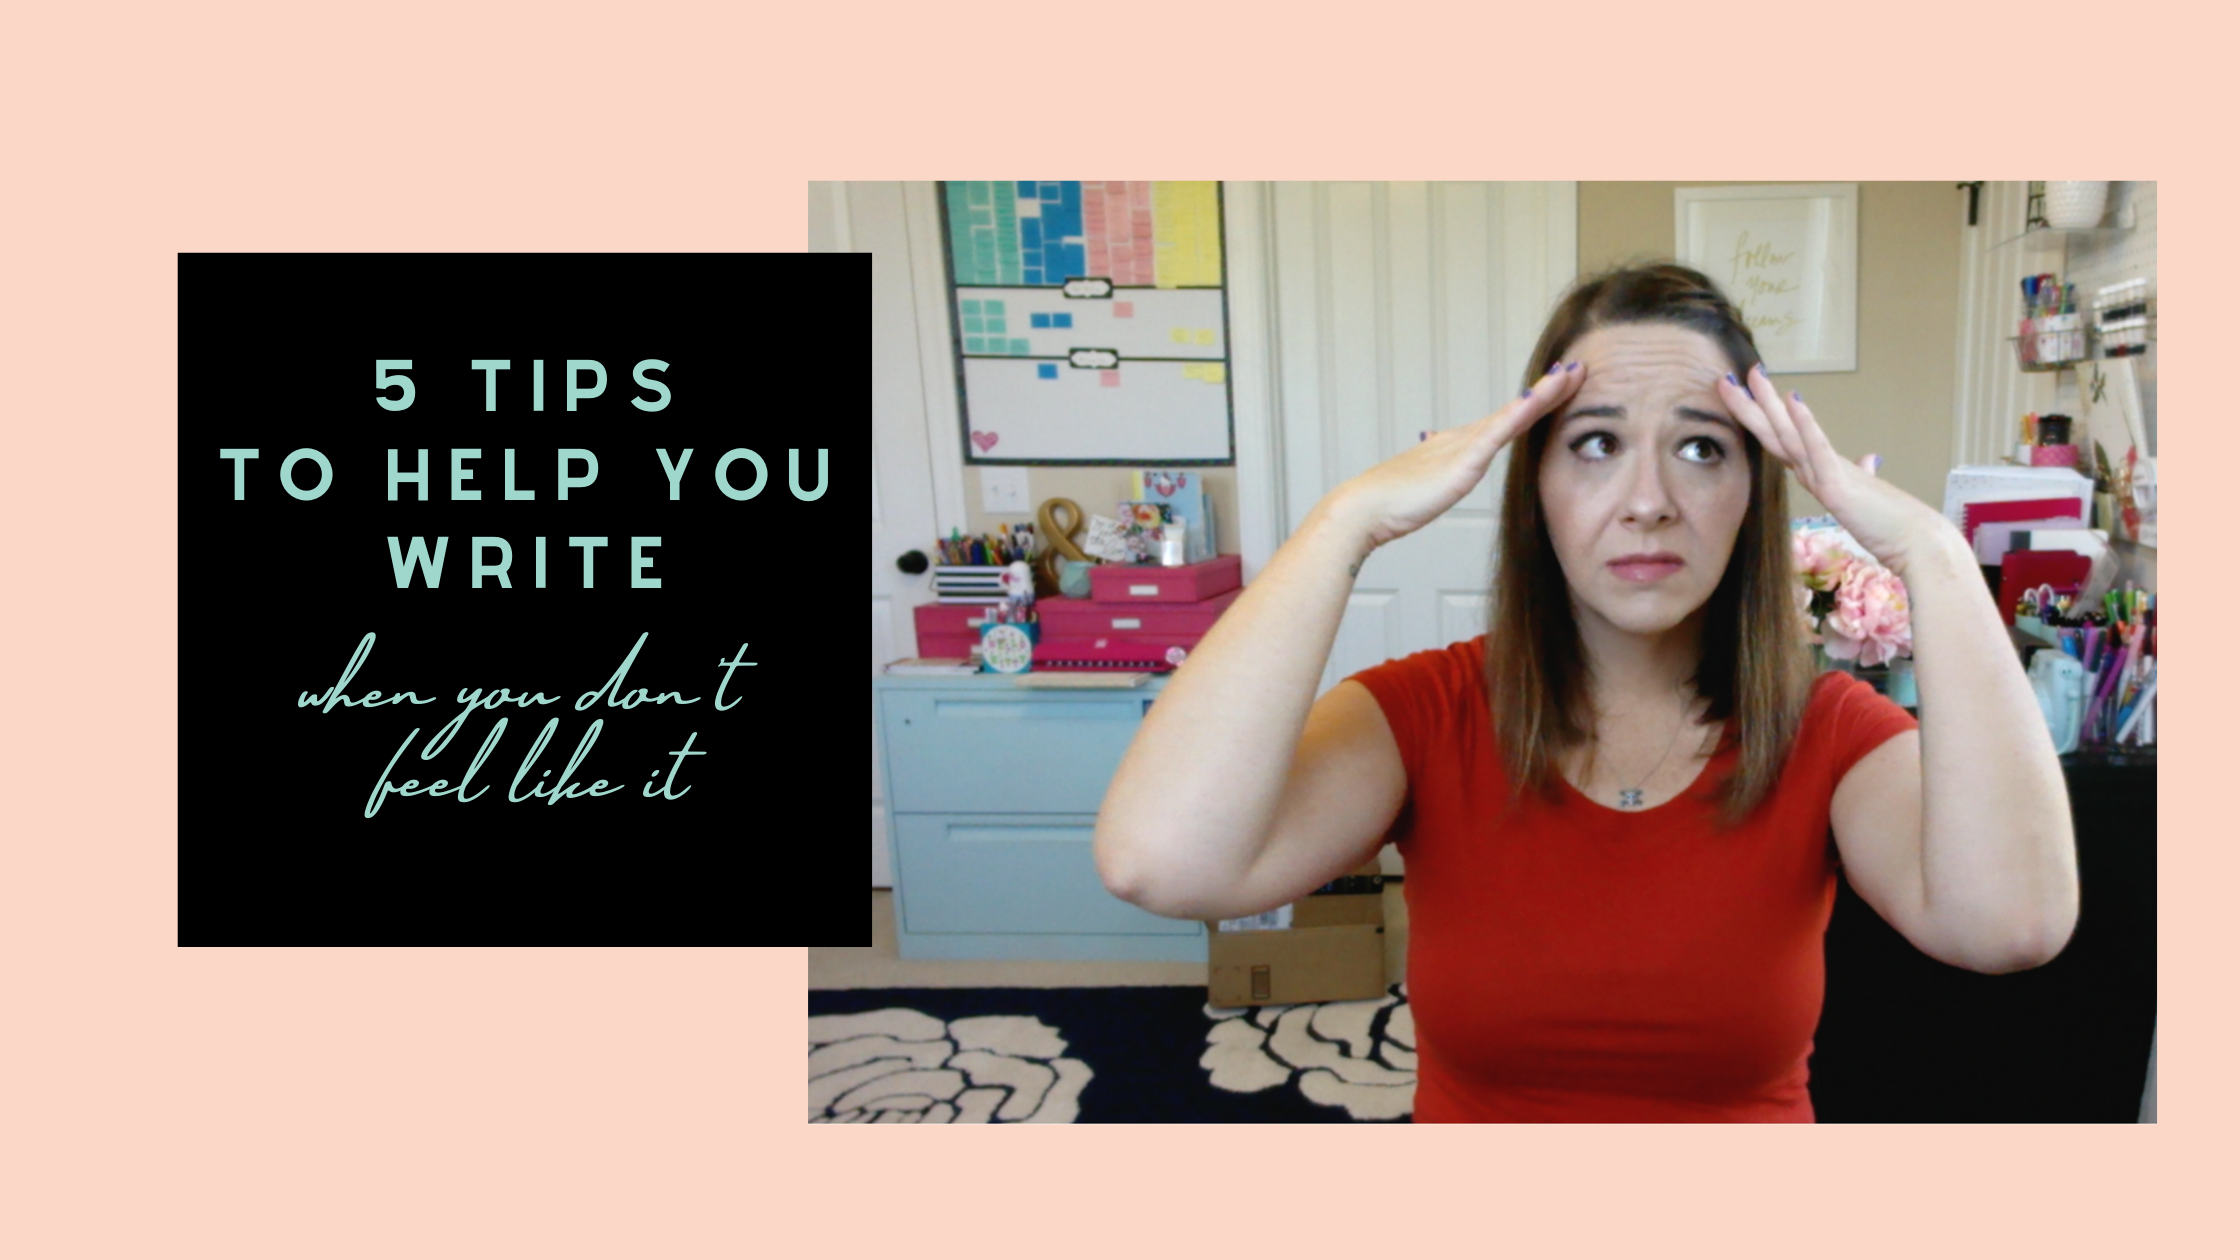 How To Write When You Don’t Feel Like It